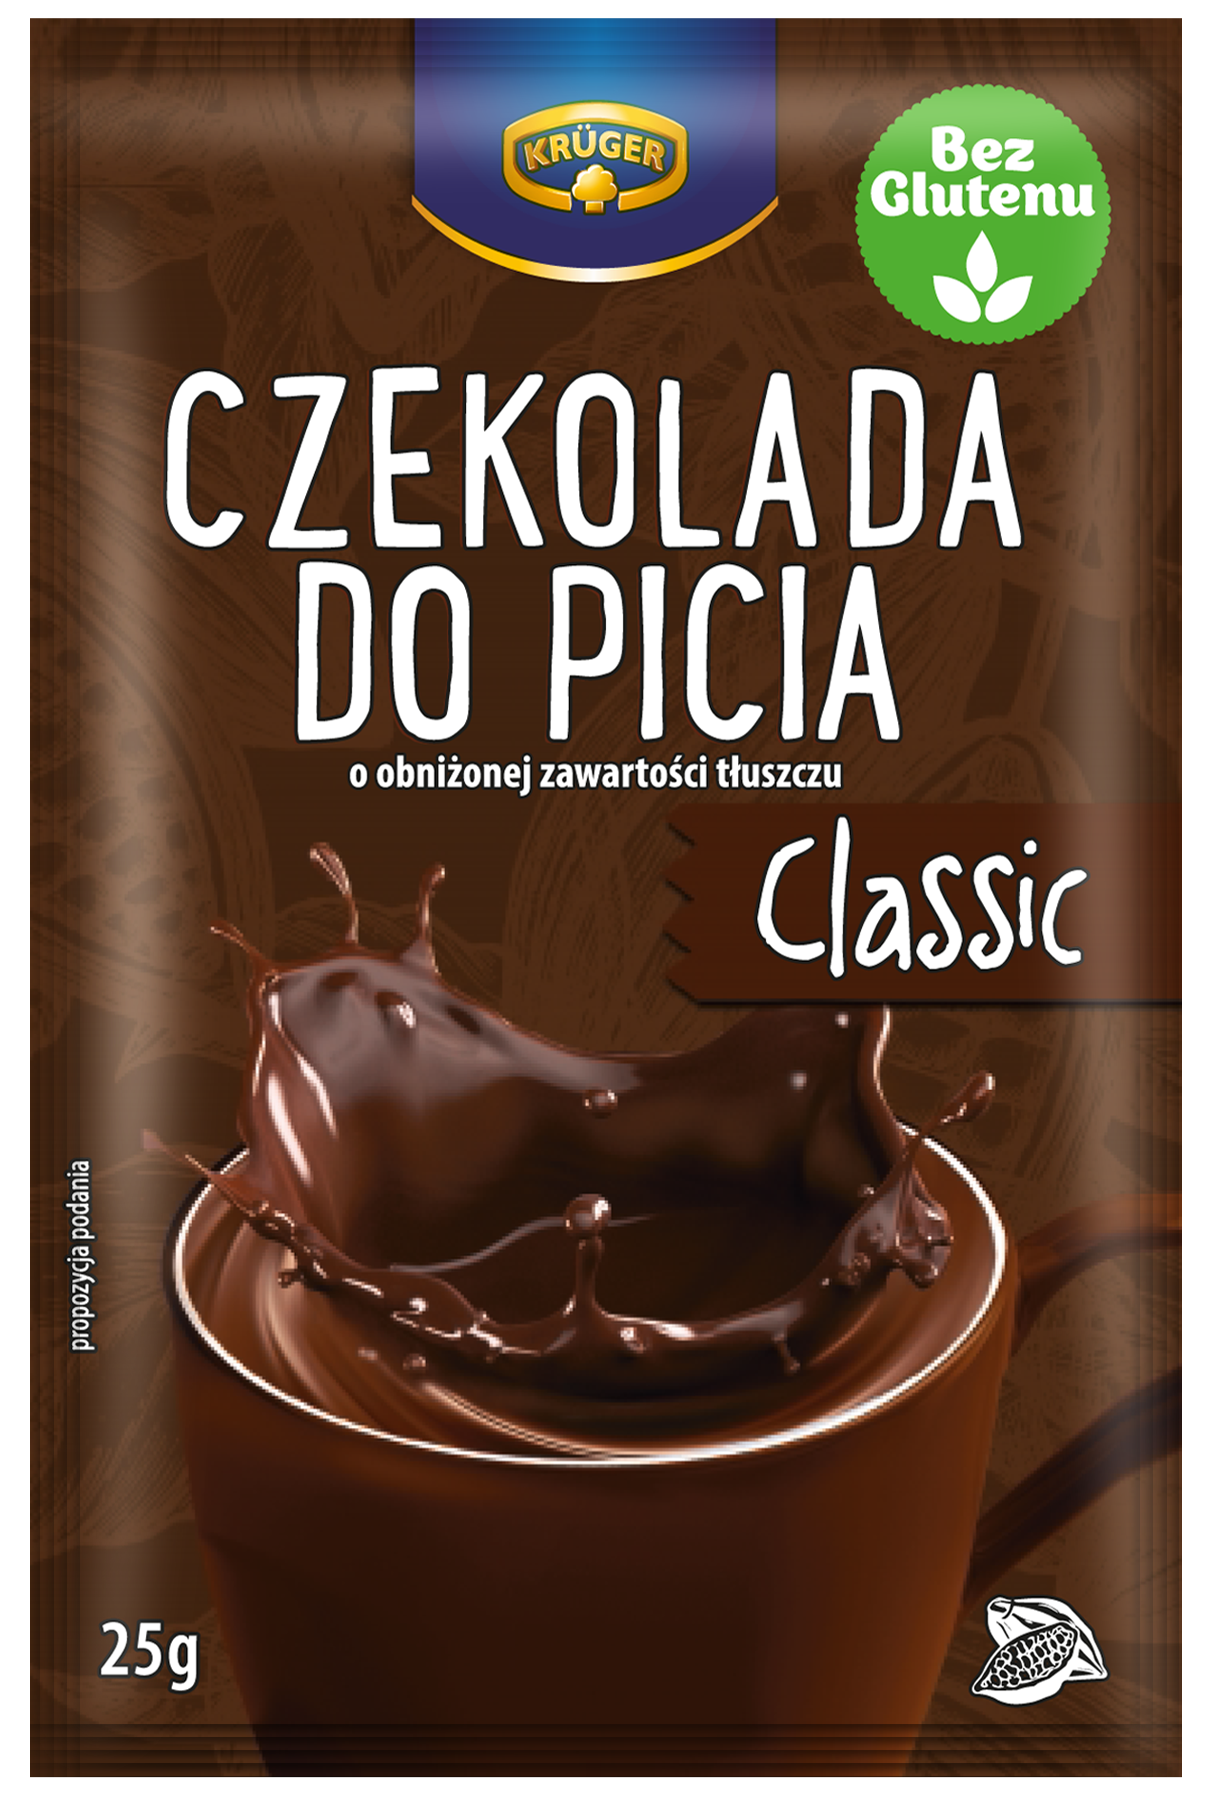 Kruger Classic Drinking Chocolate with reduced fat content